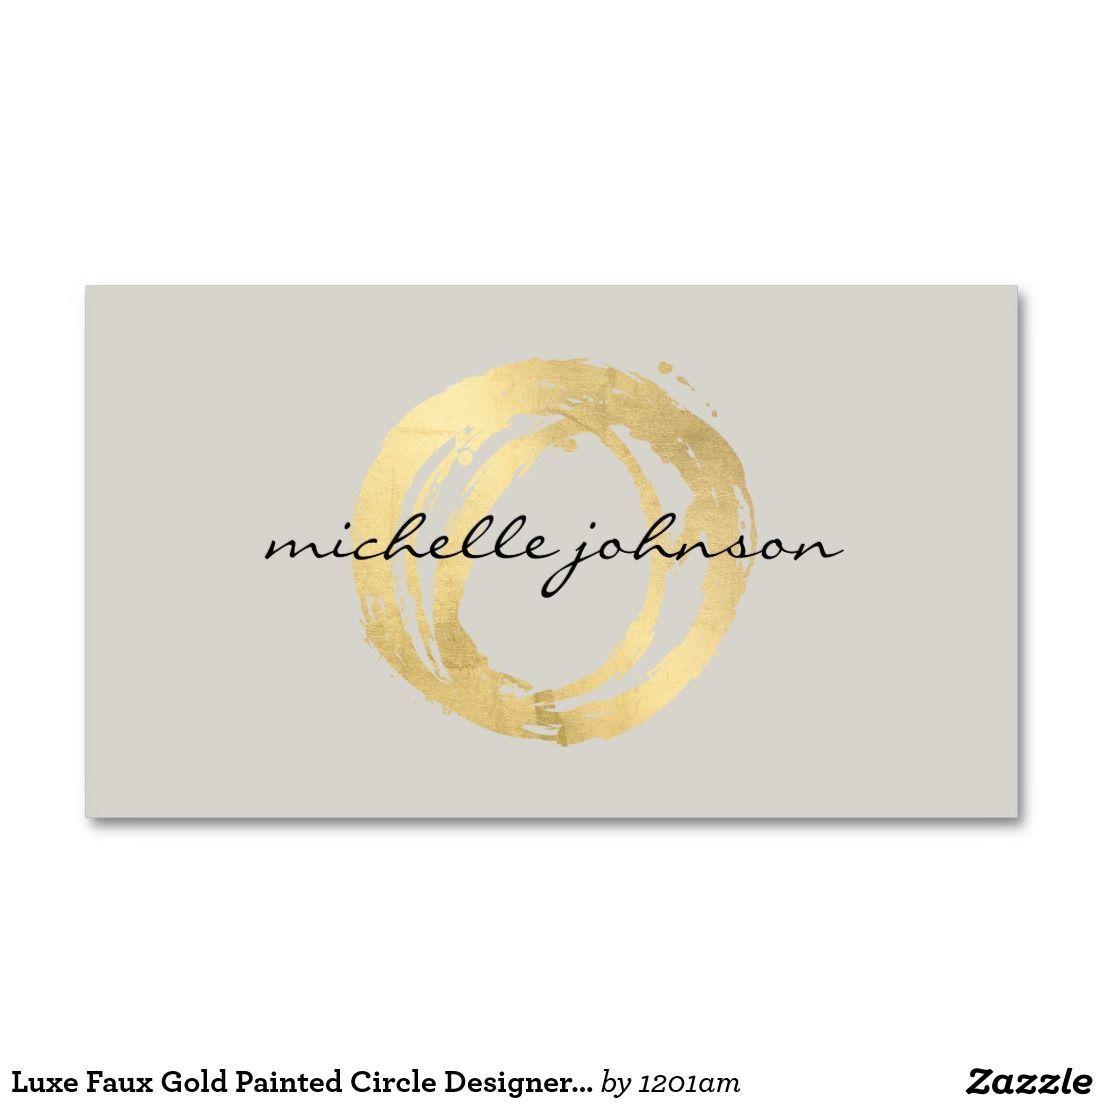 Gray and Yellow Circle Logo - Luxe Faux Gold Painted Circle Designer Logo on Tan Business Card ...